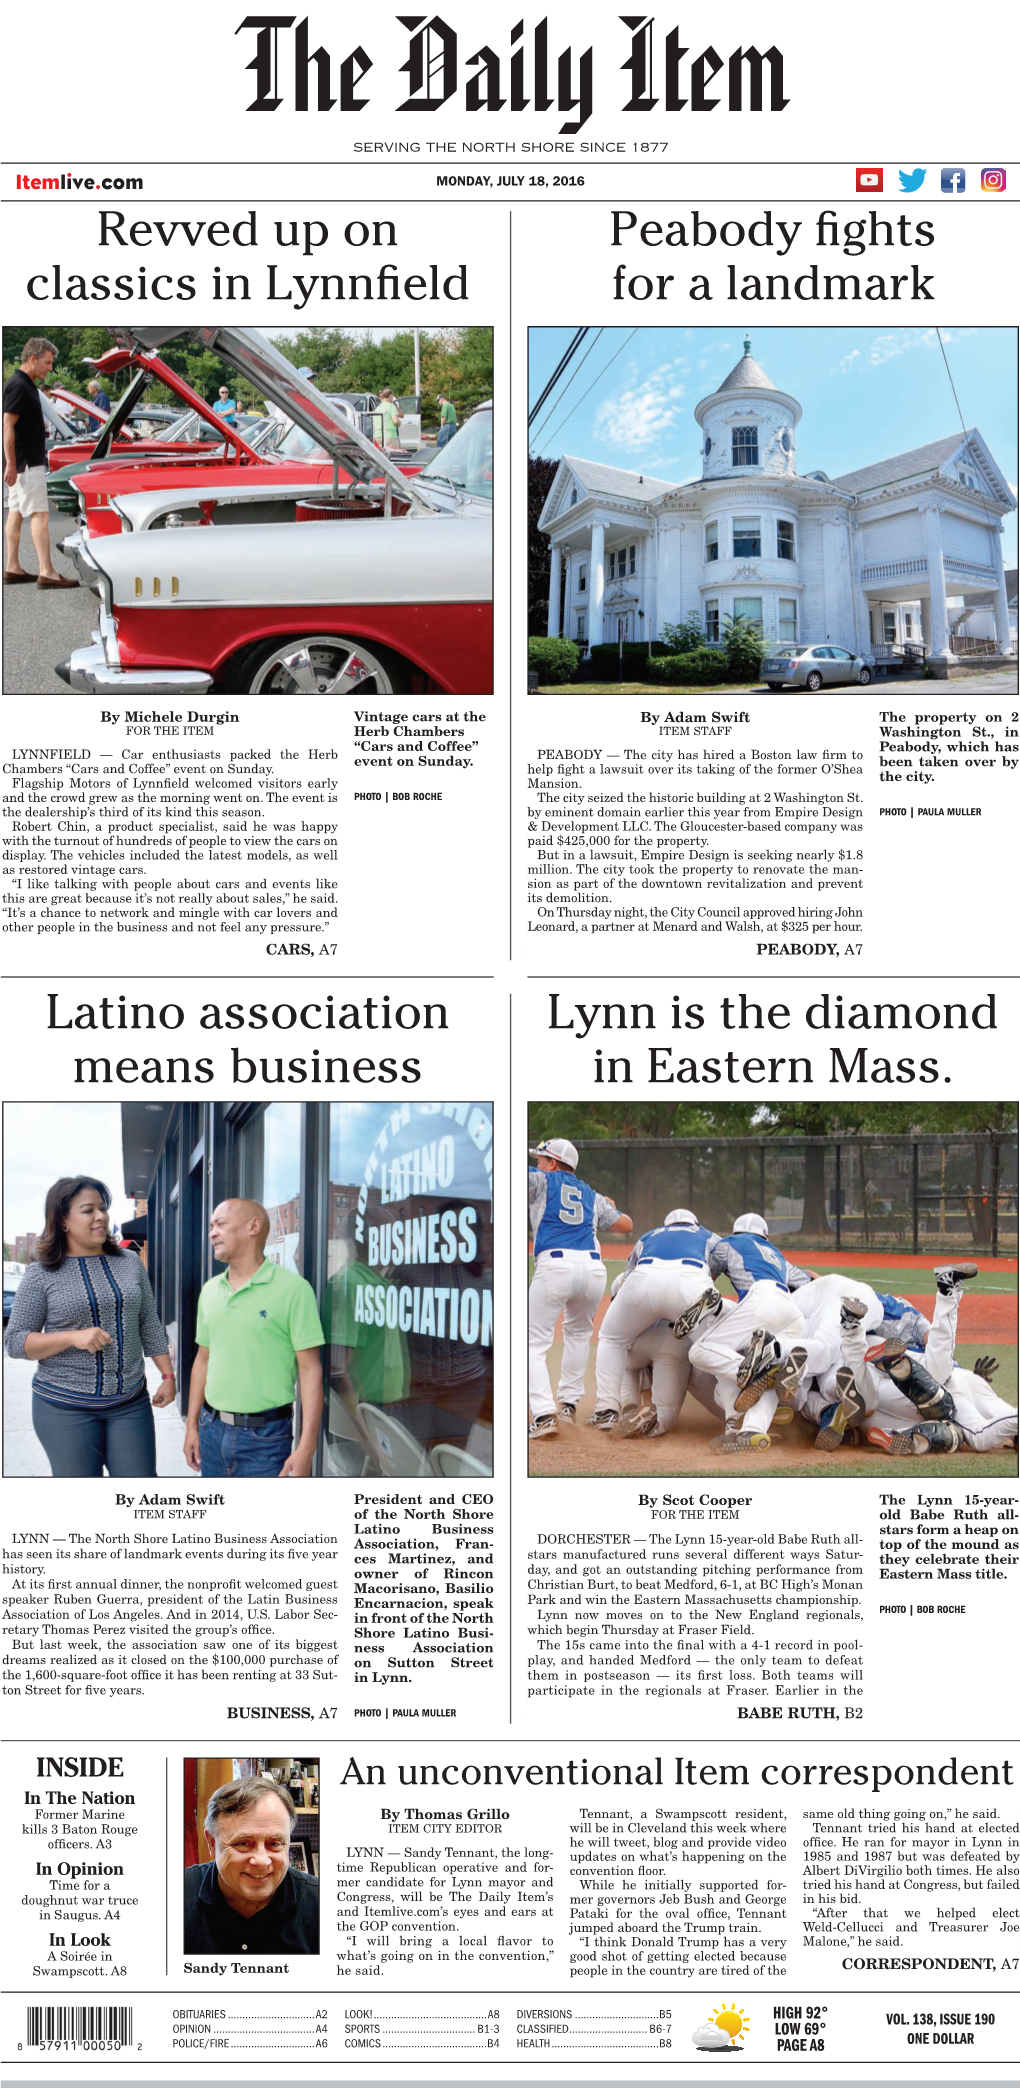 Revved up on Classics in Lynnfield Latino Association Means Business